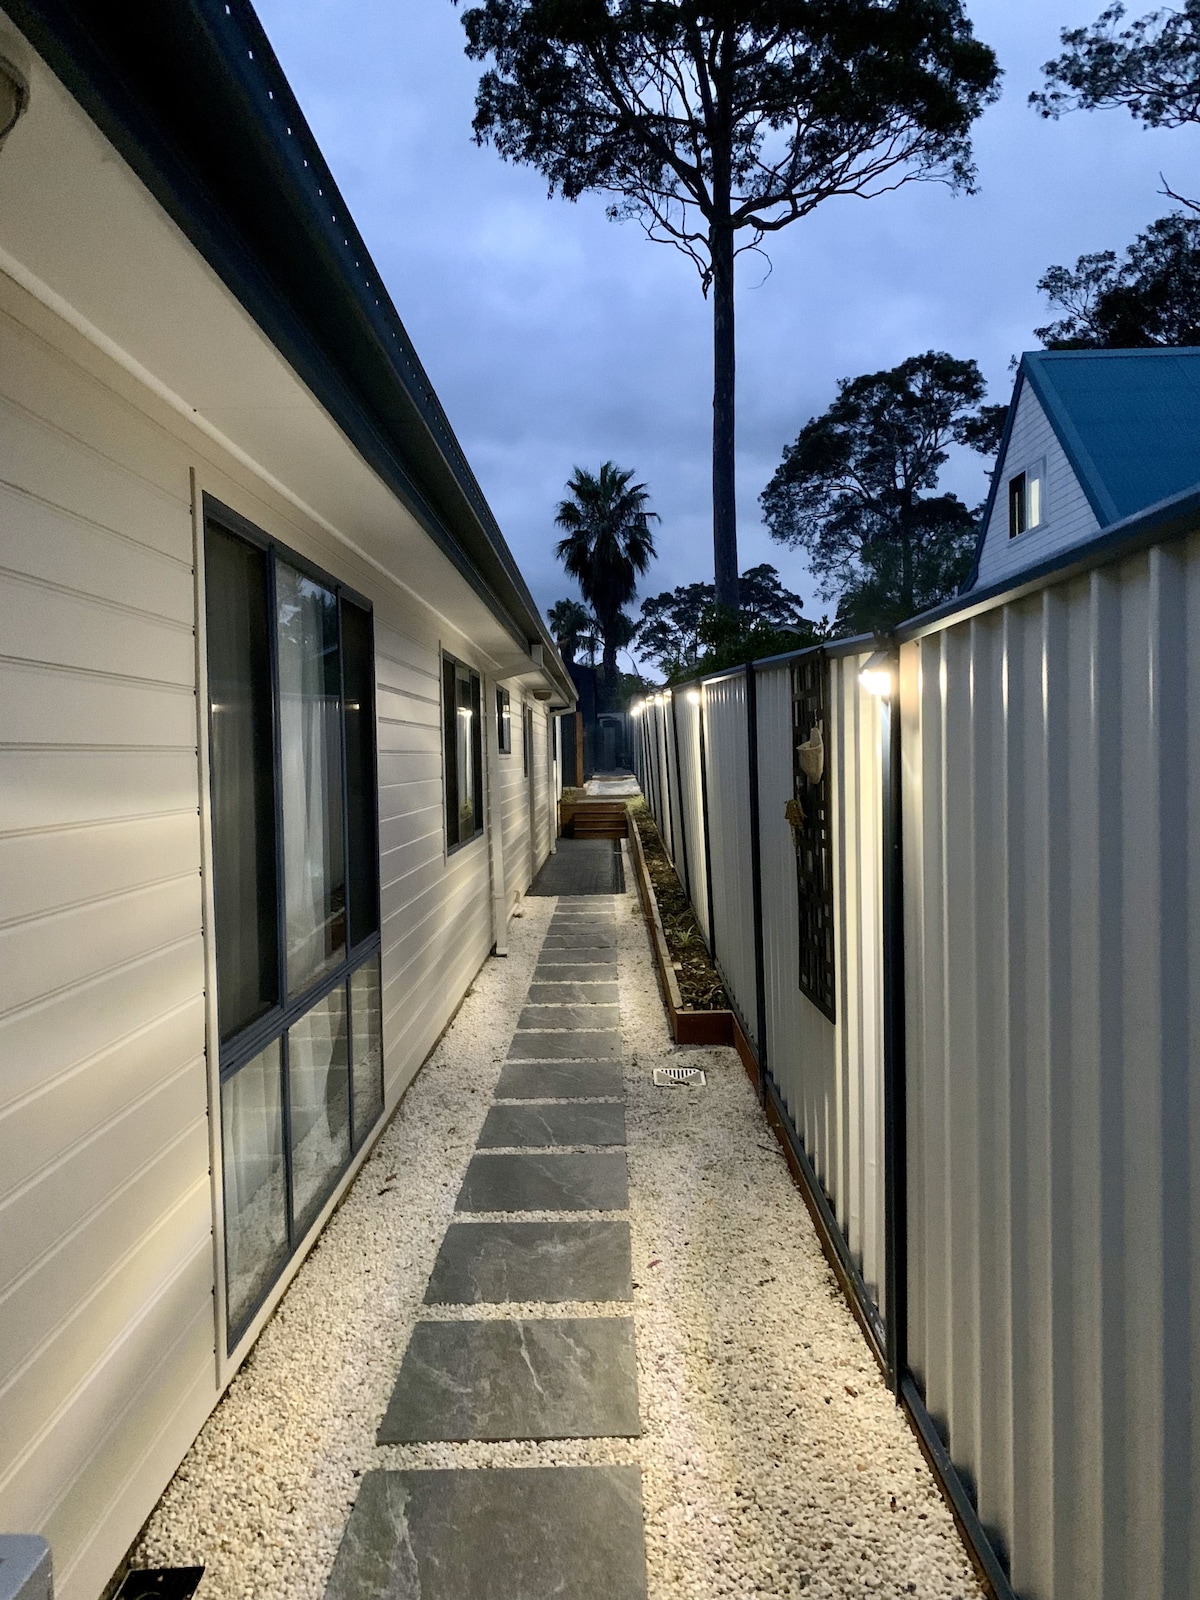 Erowal Bay Guesthouse
Jervis Bay